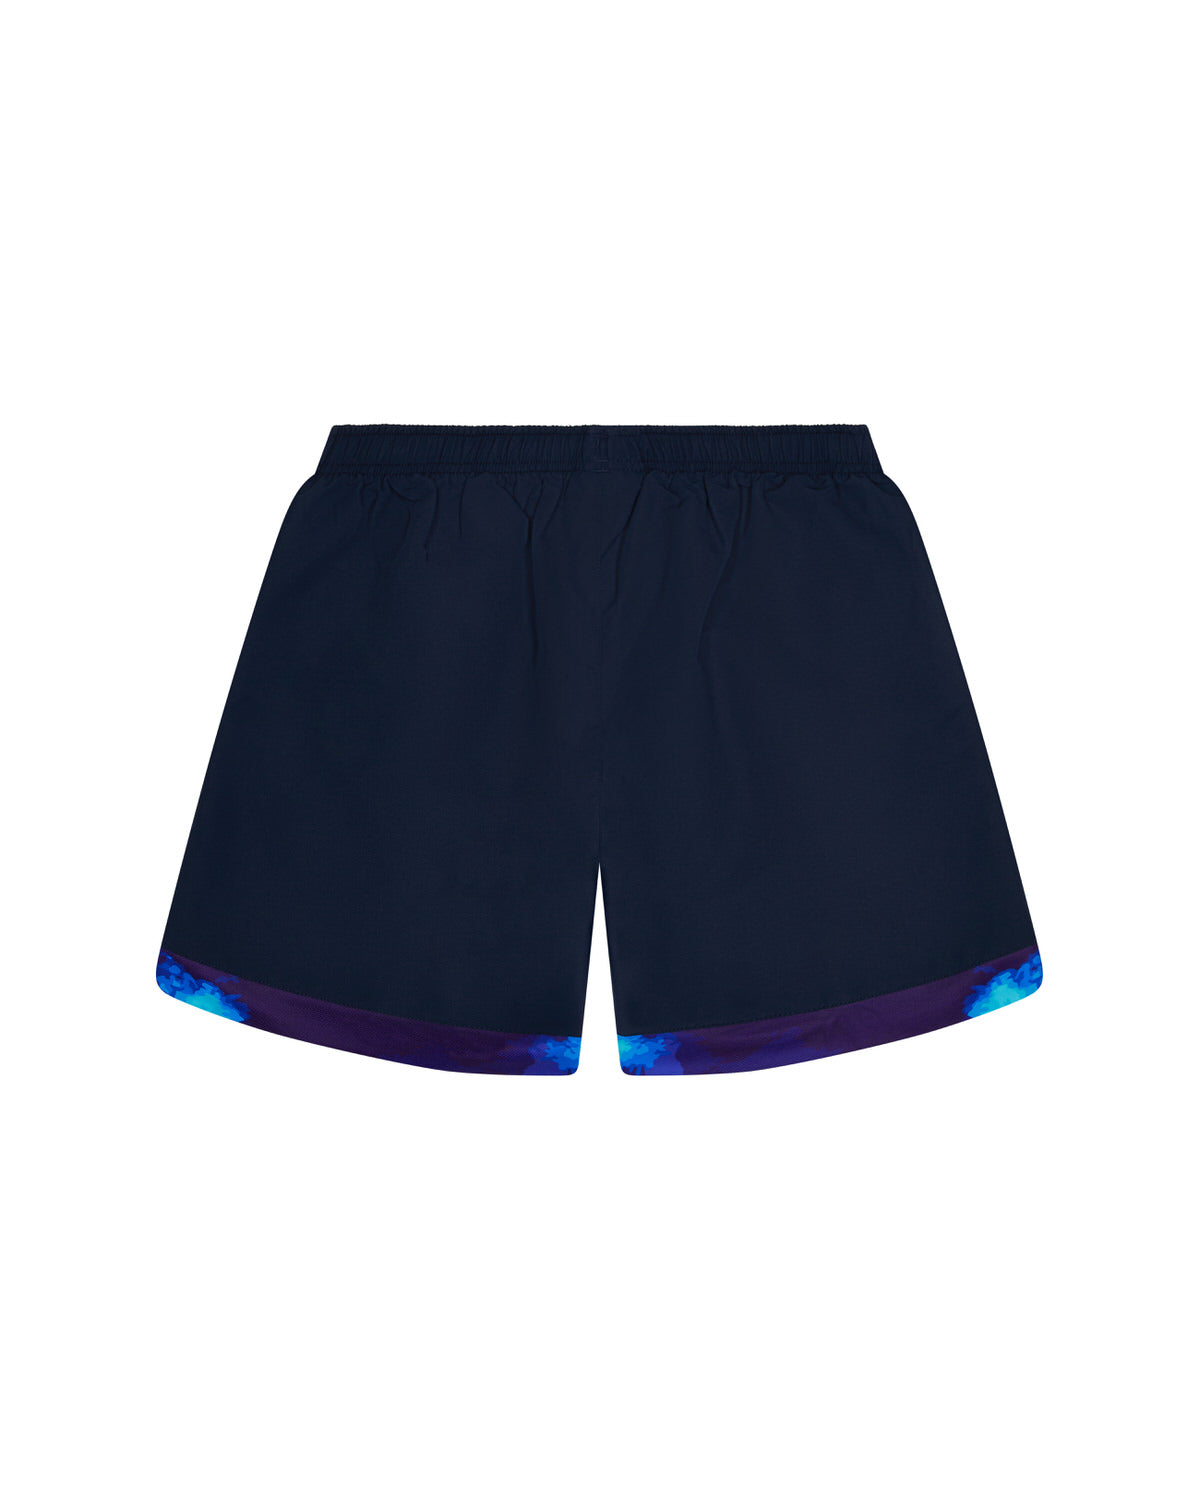 Leicester Tigers - NMD Leisure Short - Navy